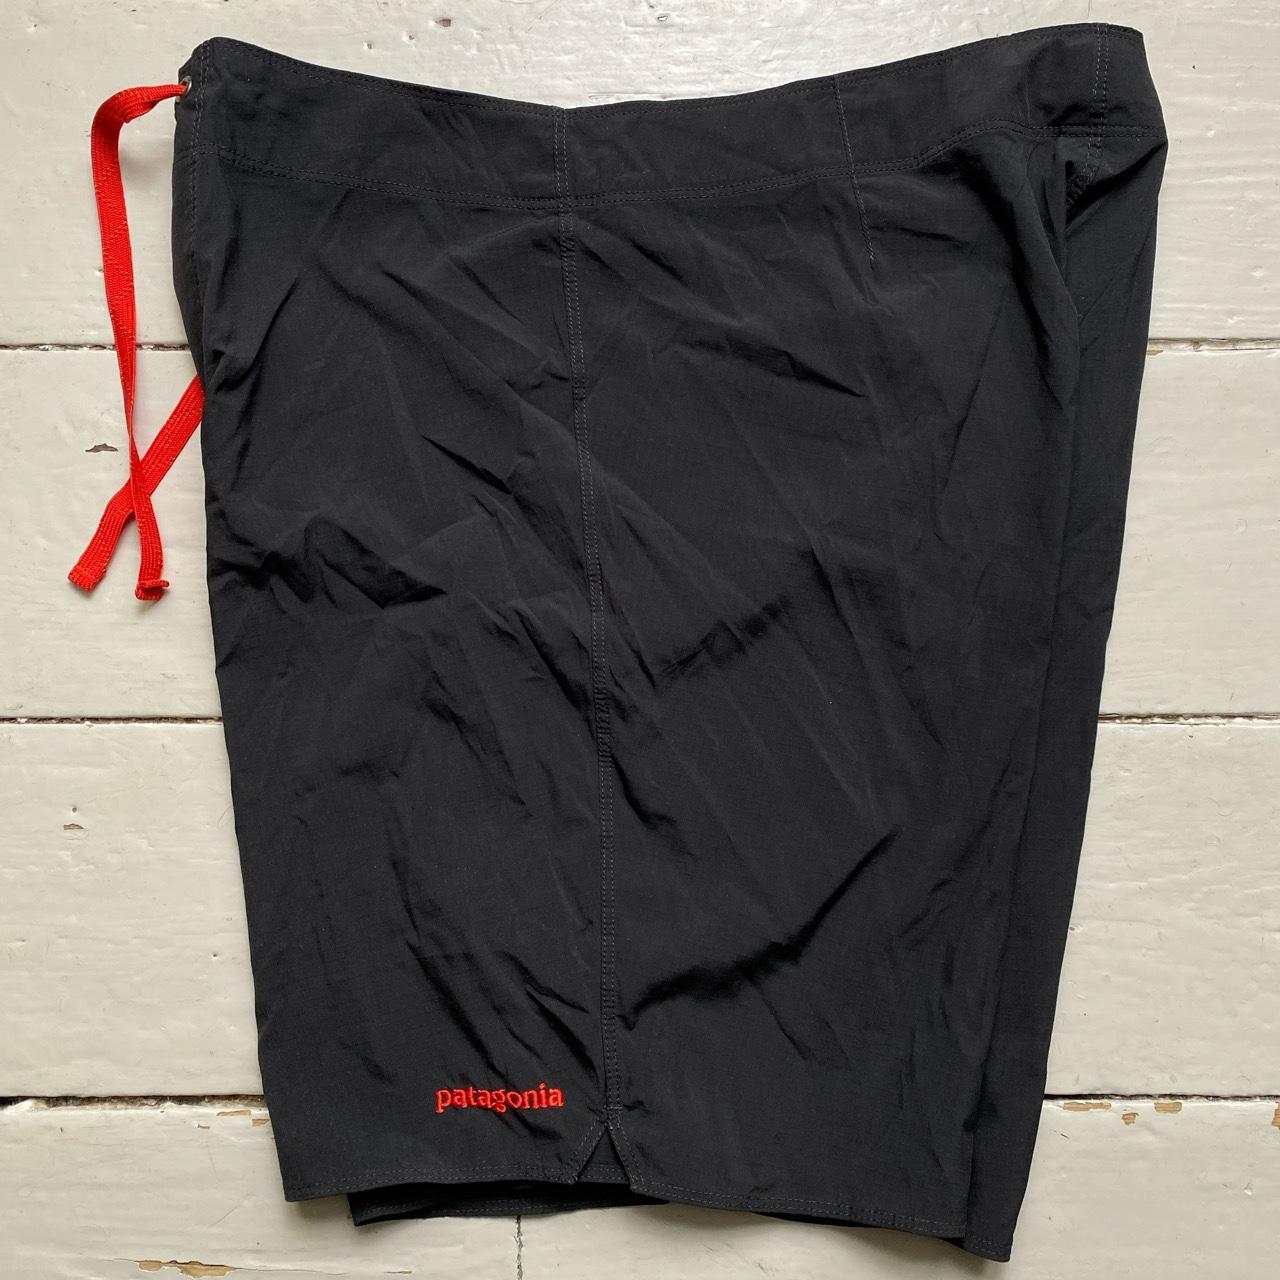 Patagonia Black and Red Shorts